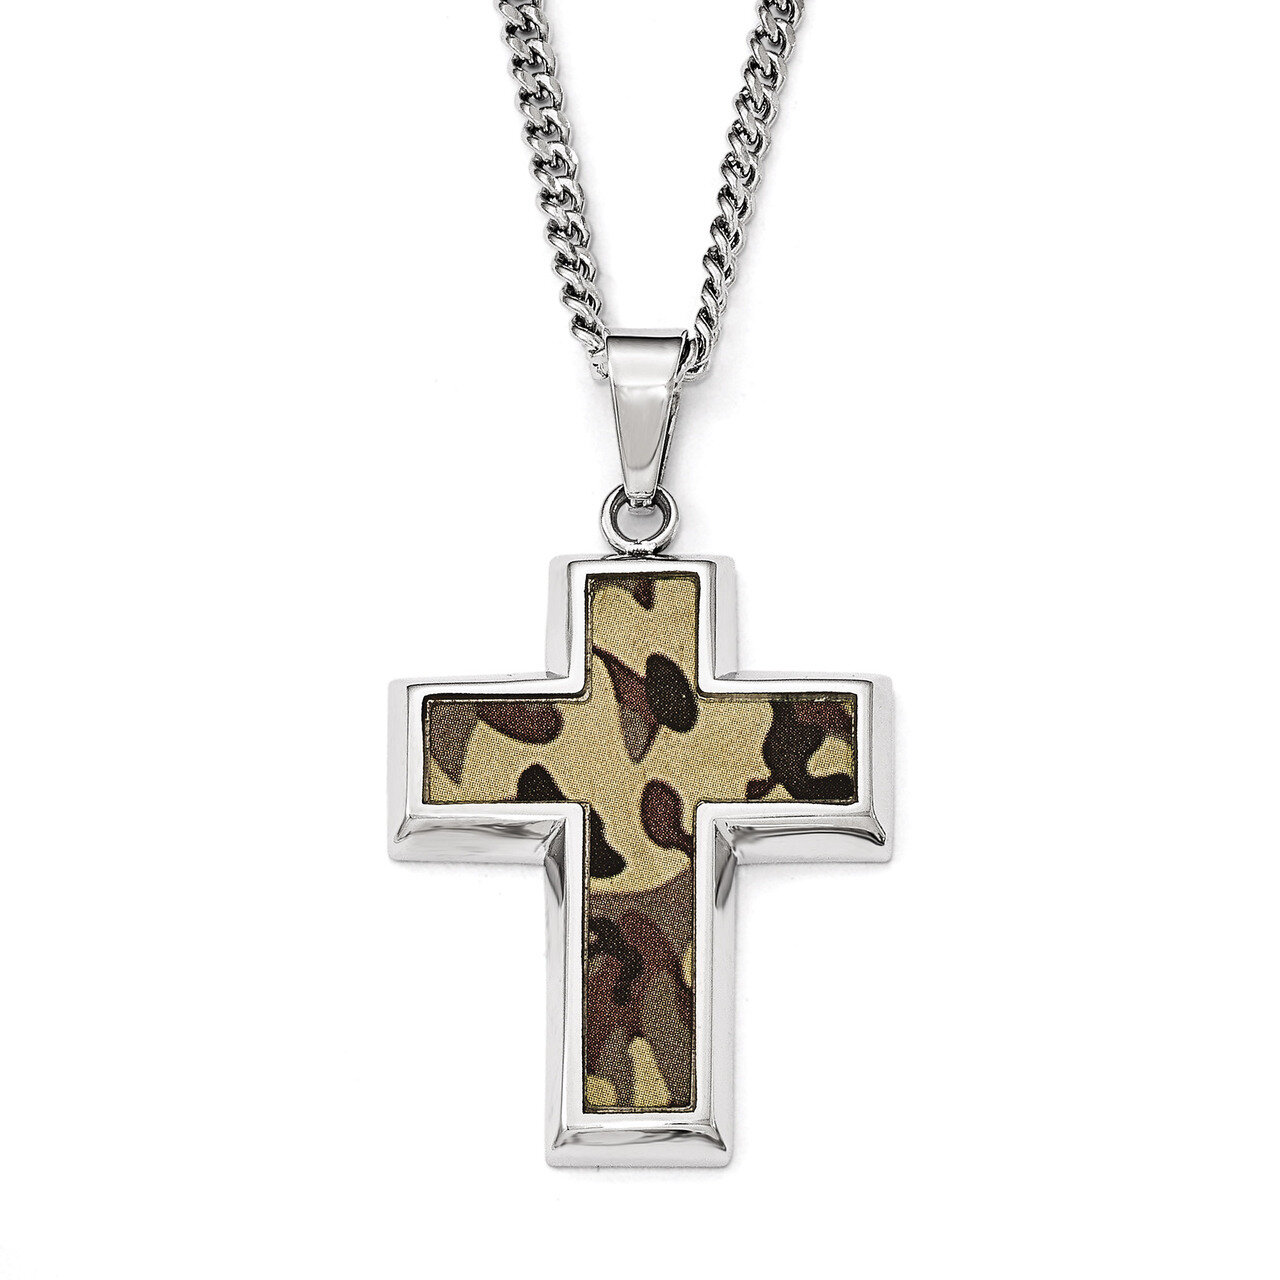 Polished Printed BrownCamo Under RubberCross Necklace - Stainless Steel SRN1807-22